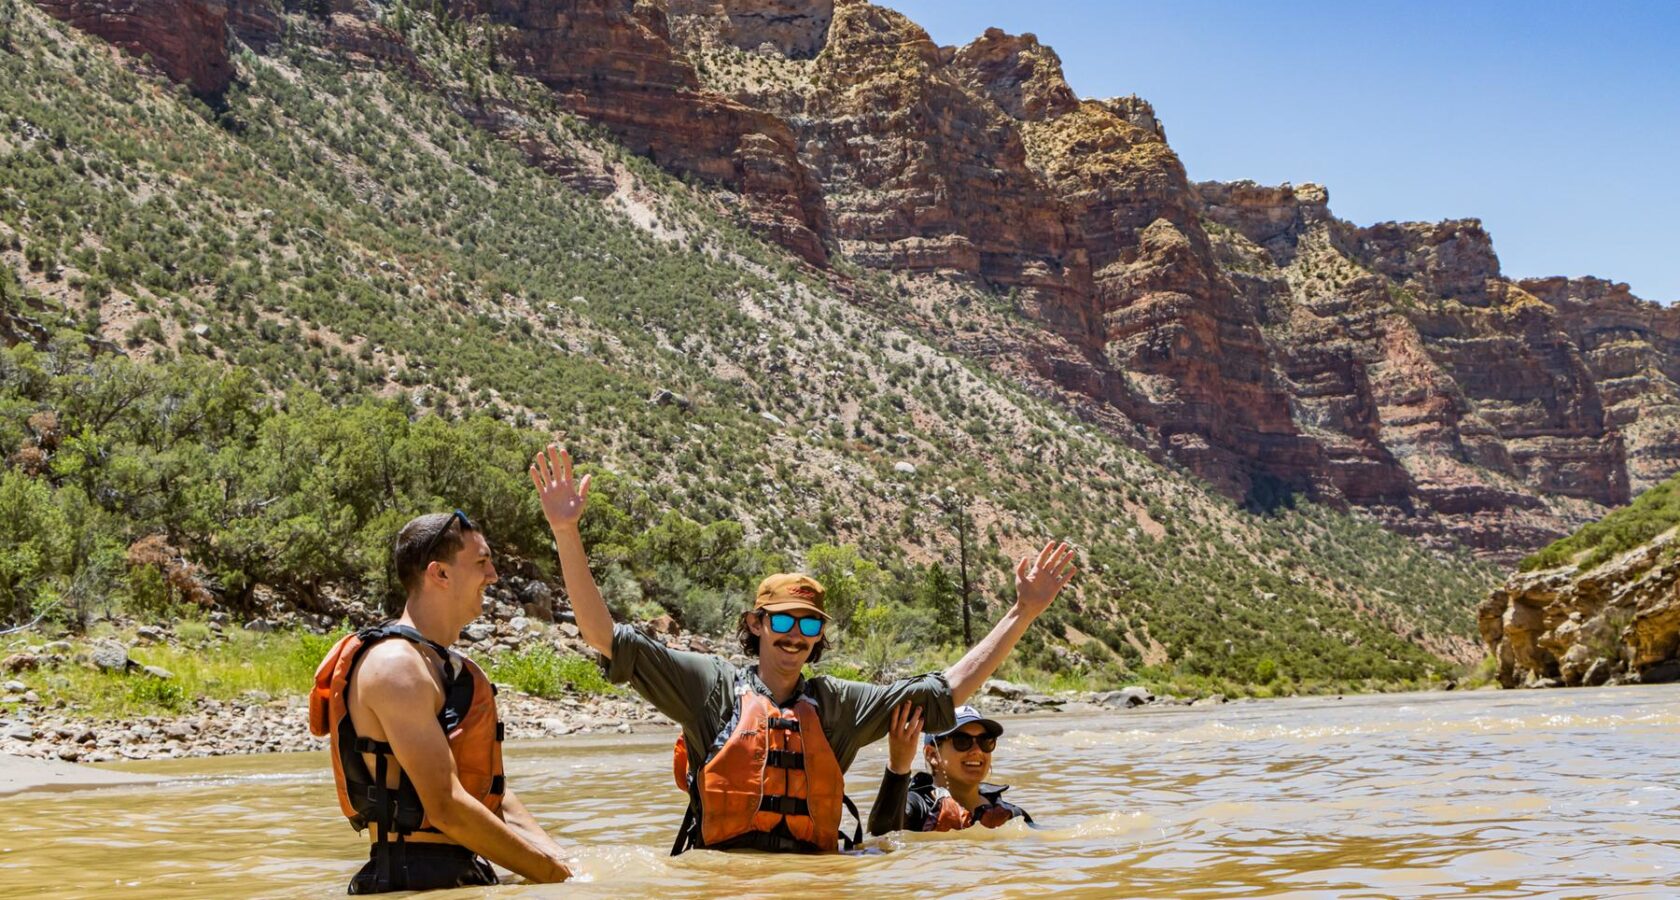 3 men standing in the Green River with a sandstone canyon walls behind them